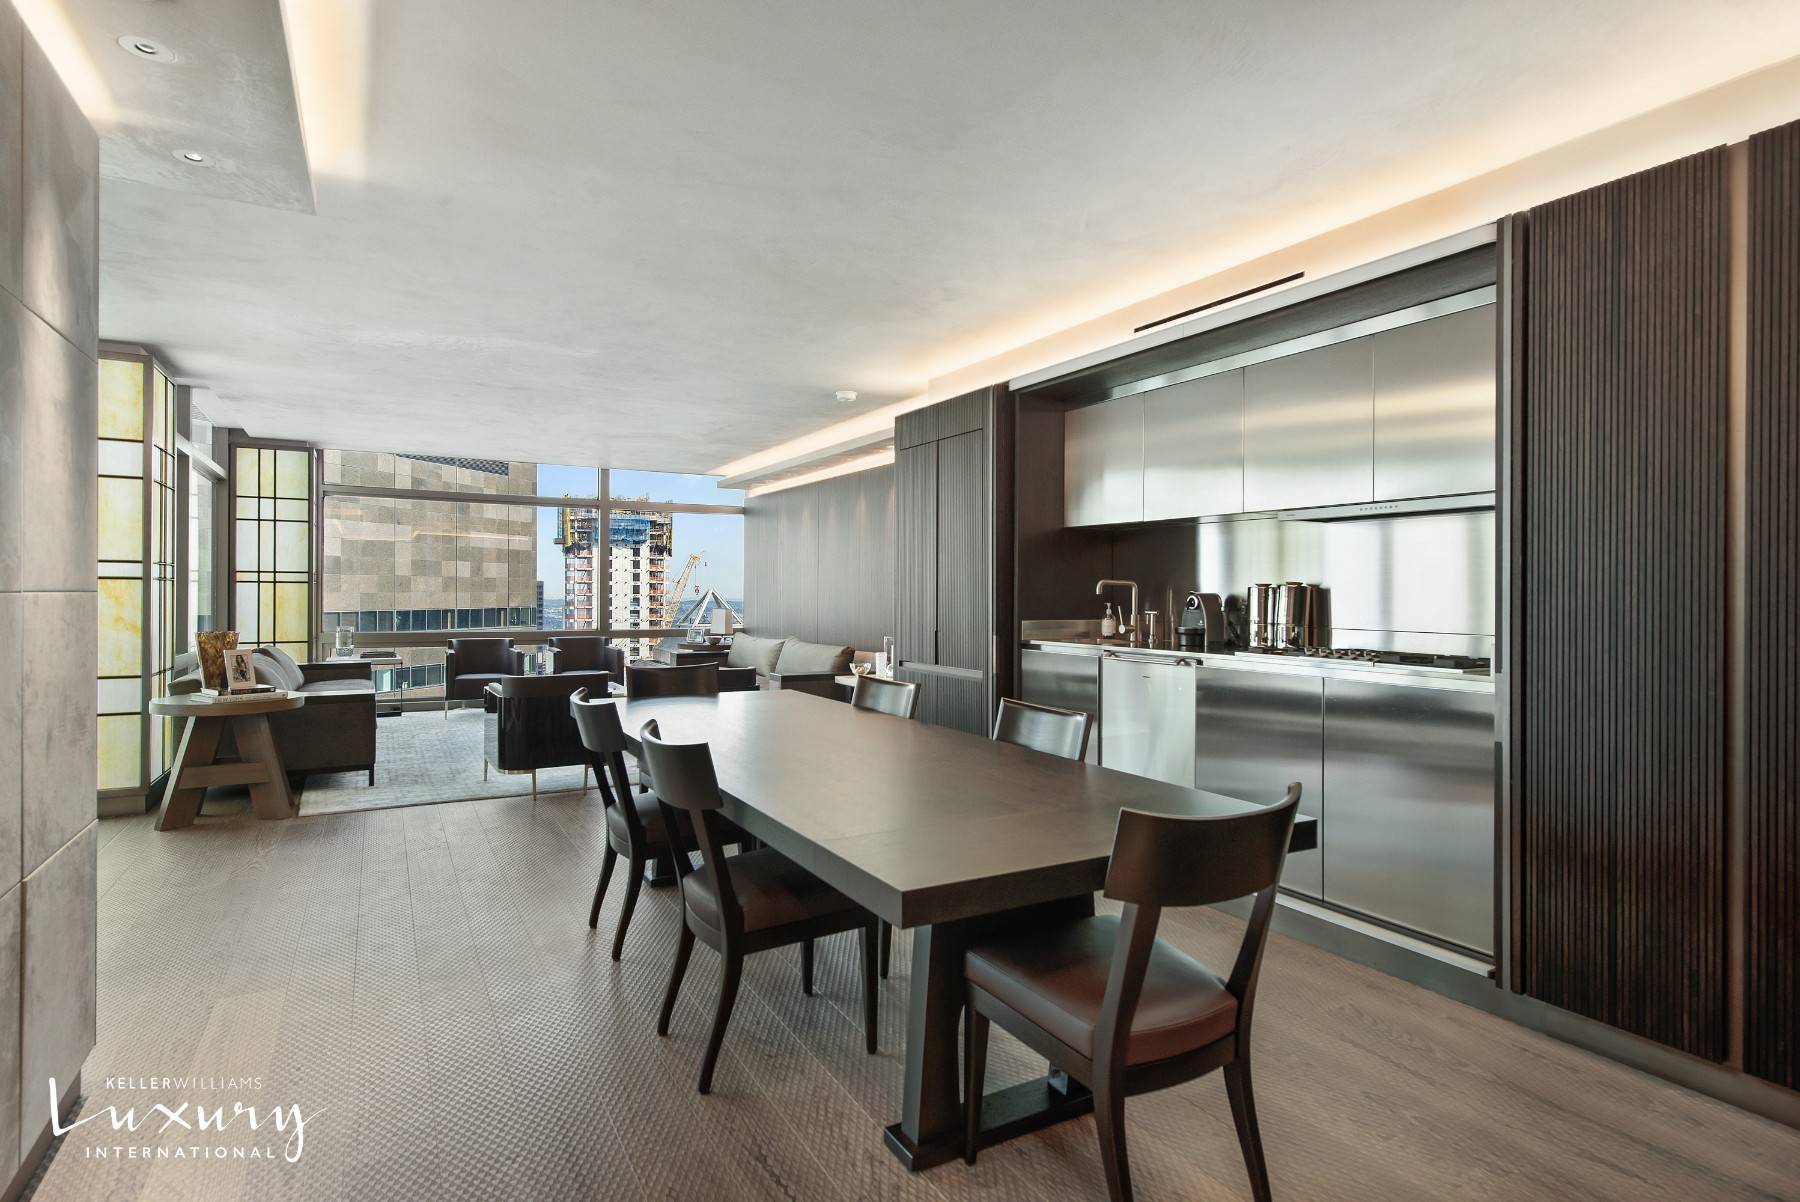 High up in the most elite reaches of Trump Tower, floating above Central Park and the City, a masterpiece of design and artful living has been created for a most ...